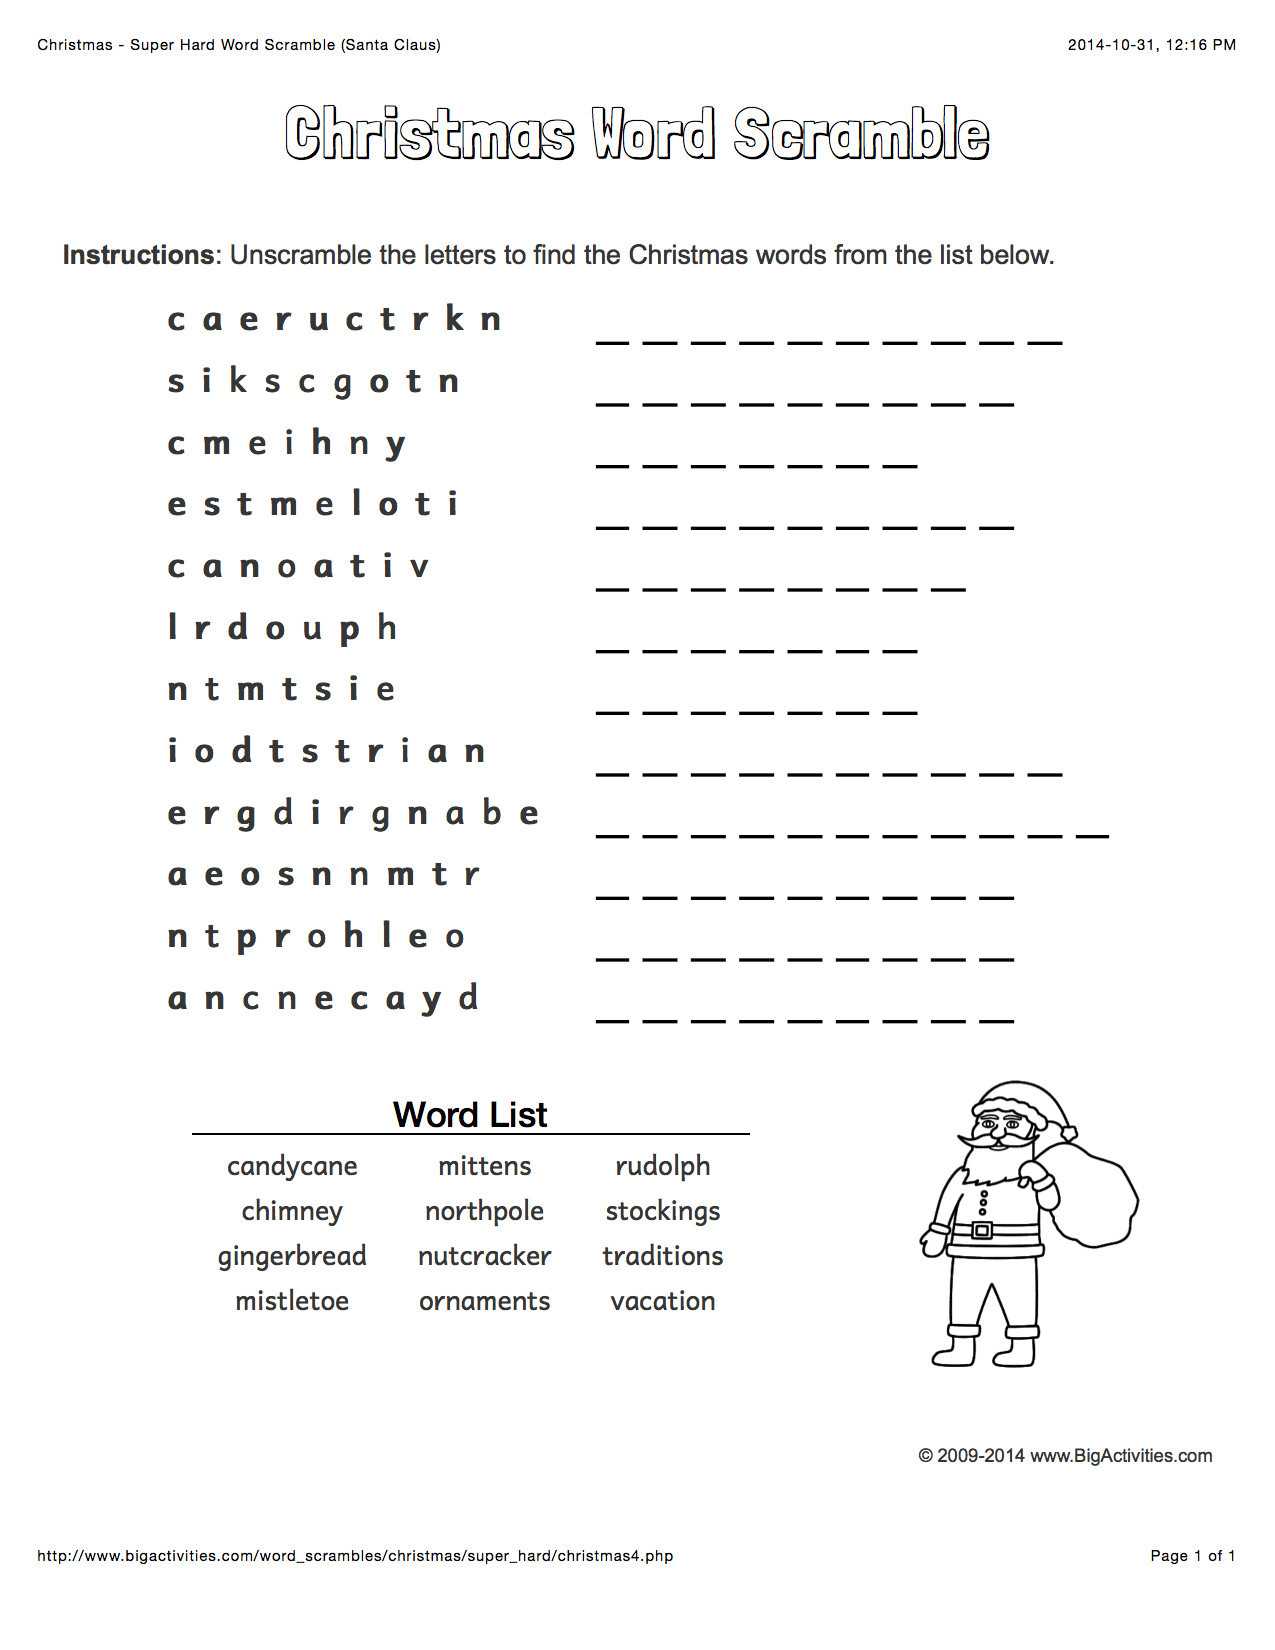 unscramble-sentences-worksheets-1st-grade-together-with-spanish-writing-prompts-for-1st